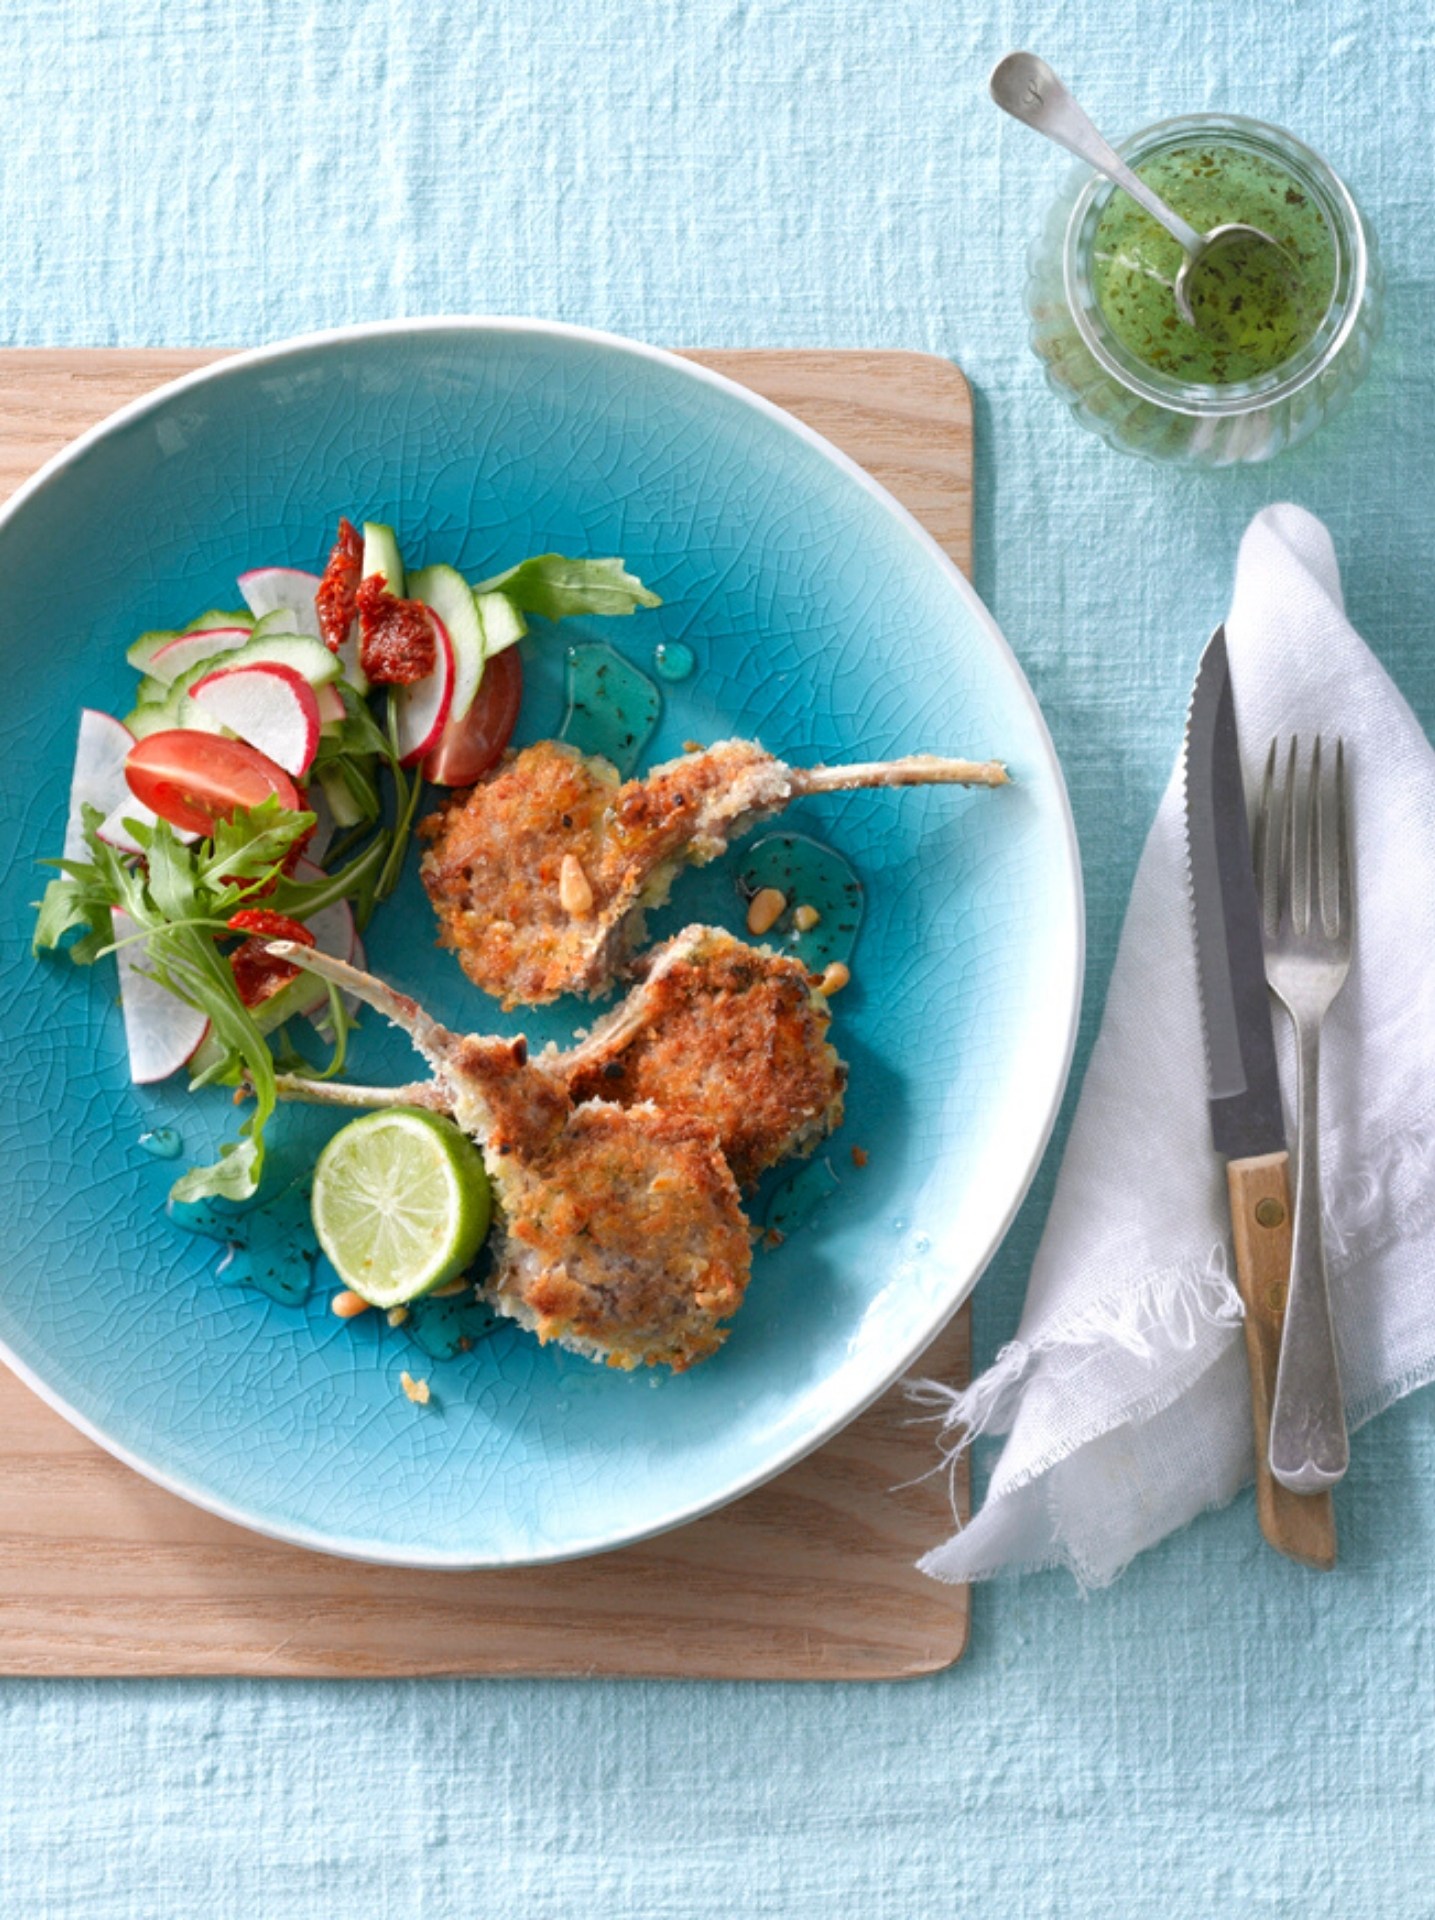 Lamb Cutlets with Minted Pine Nut Recipe | New Zealand Grass-fed Lamb